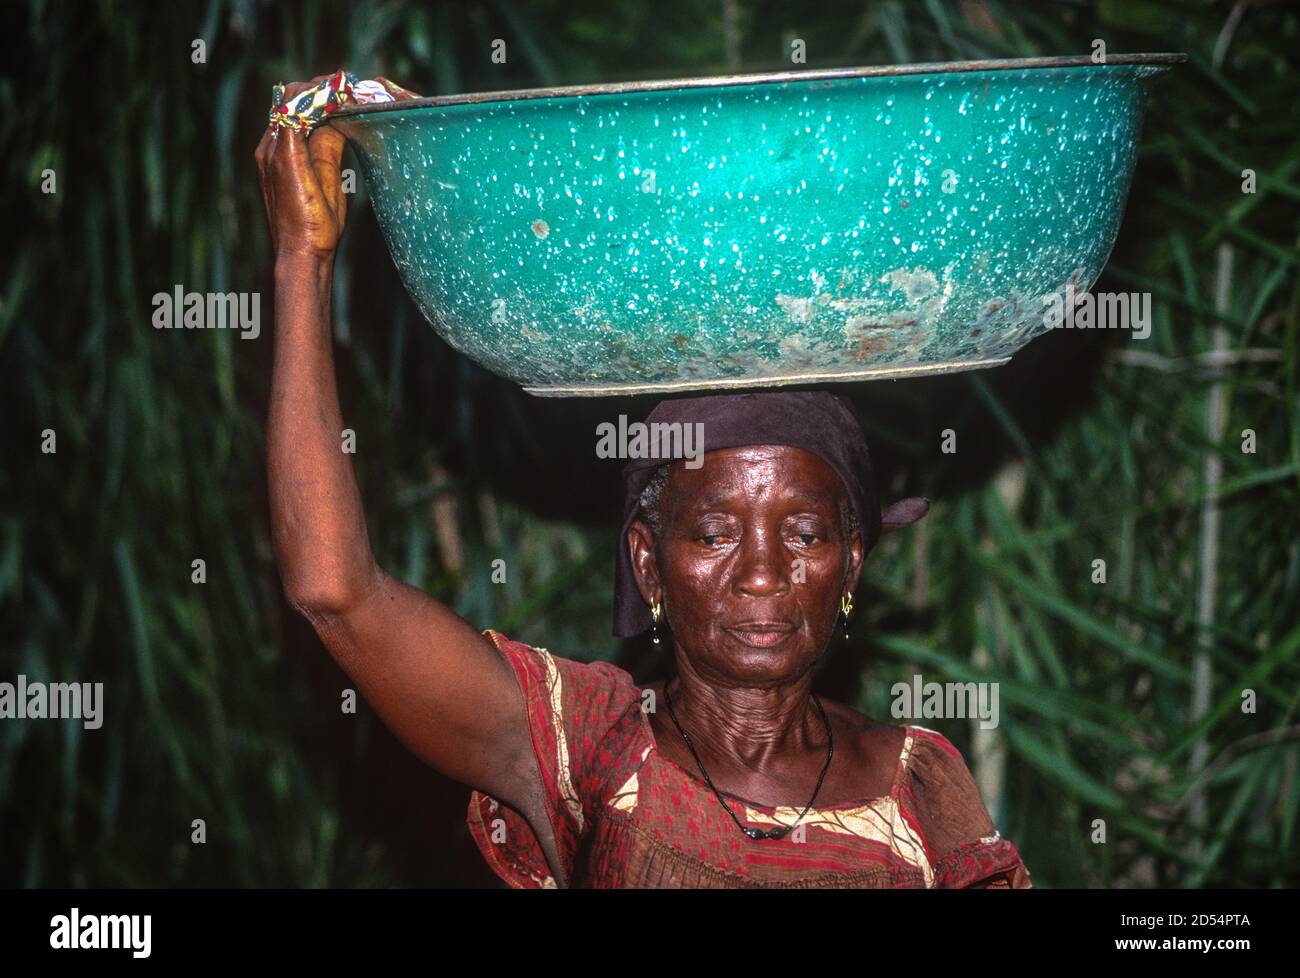 Ouassou, Ivory Coast, Cote d'Ivoire. Elderly Ivorian Woman Carrying Basin on Head. Stock Photo